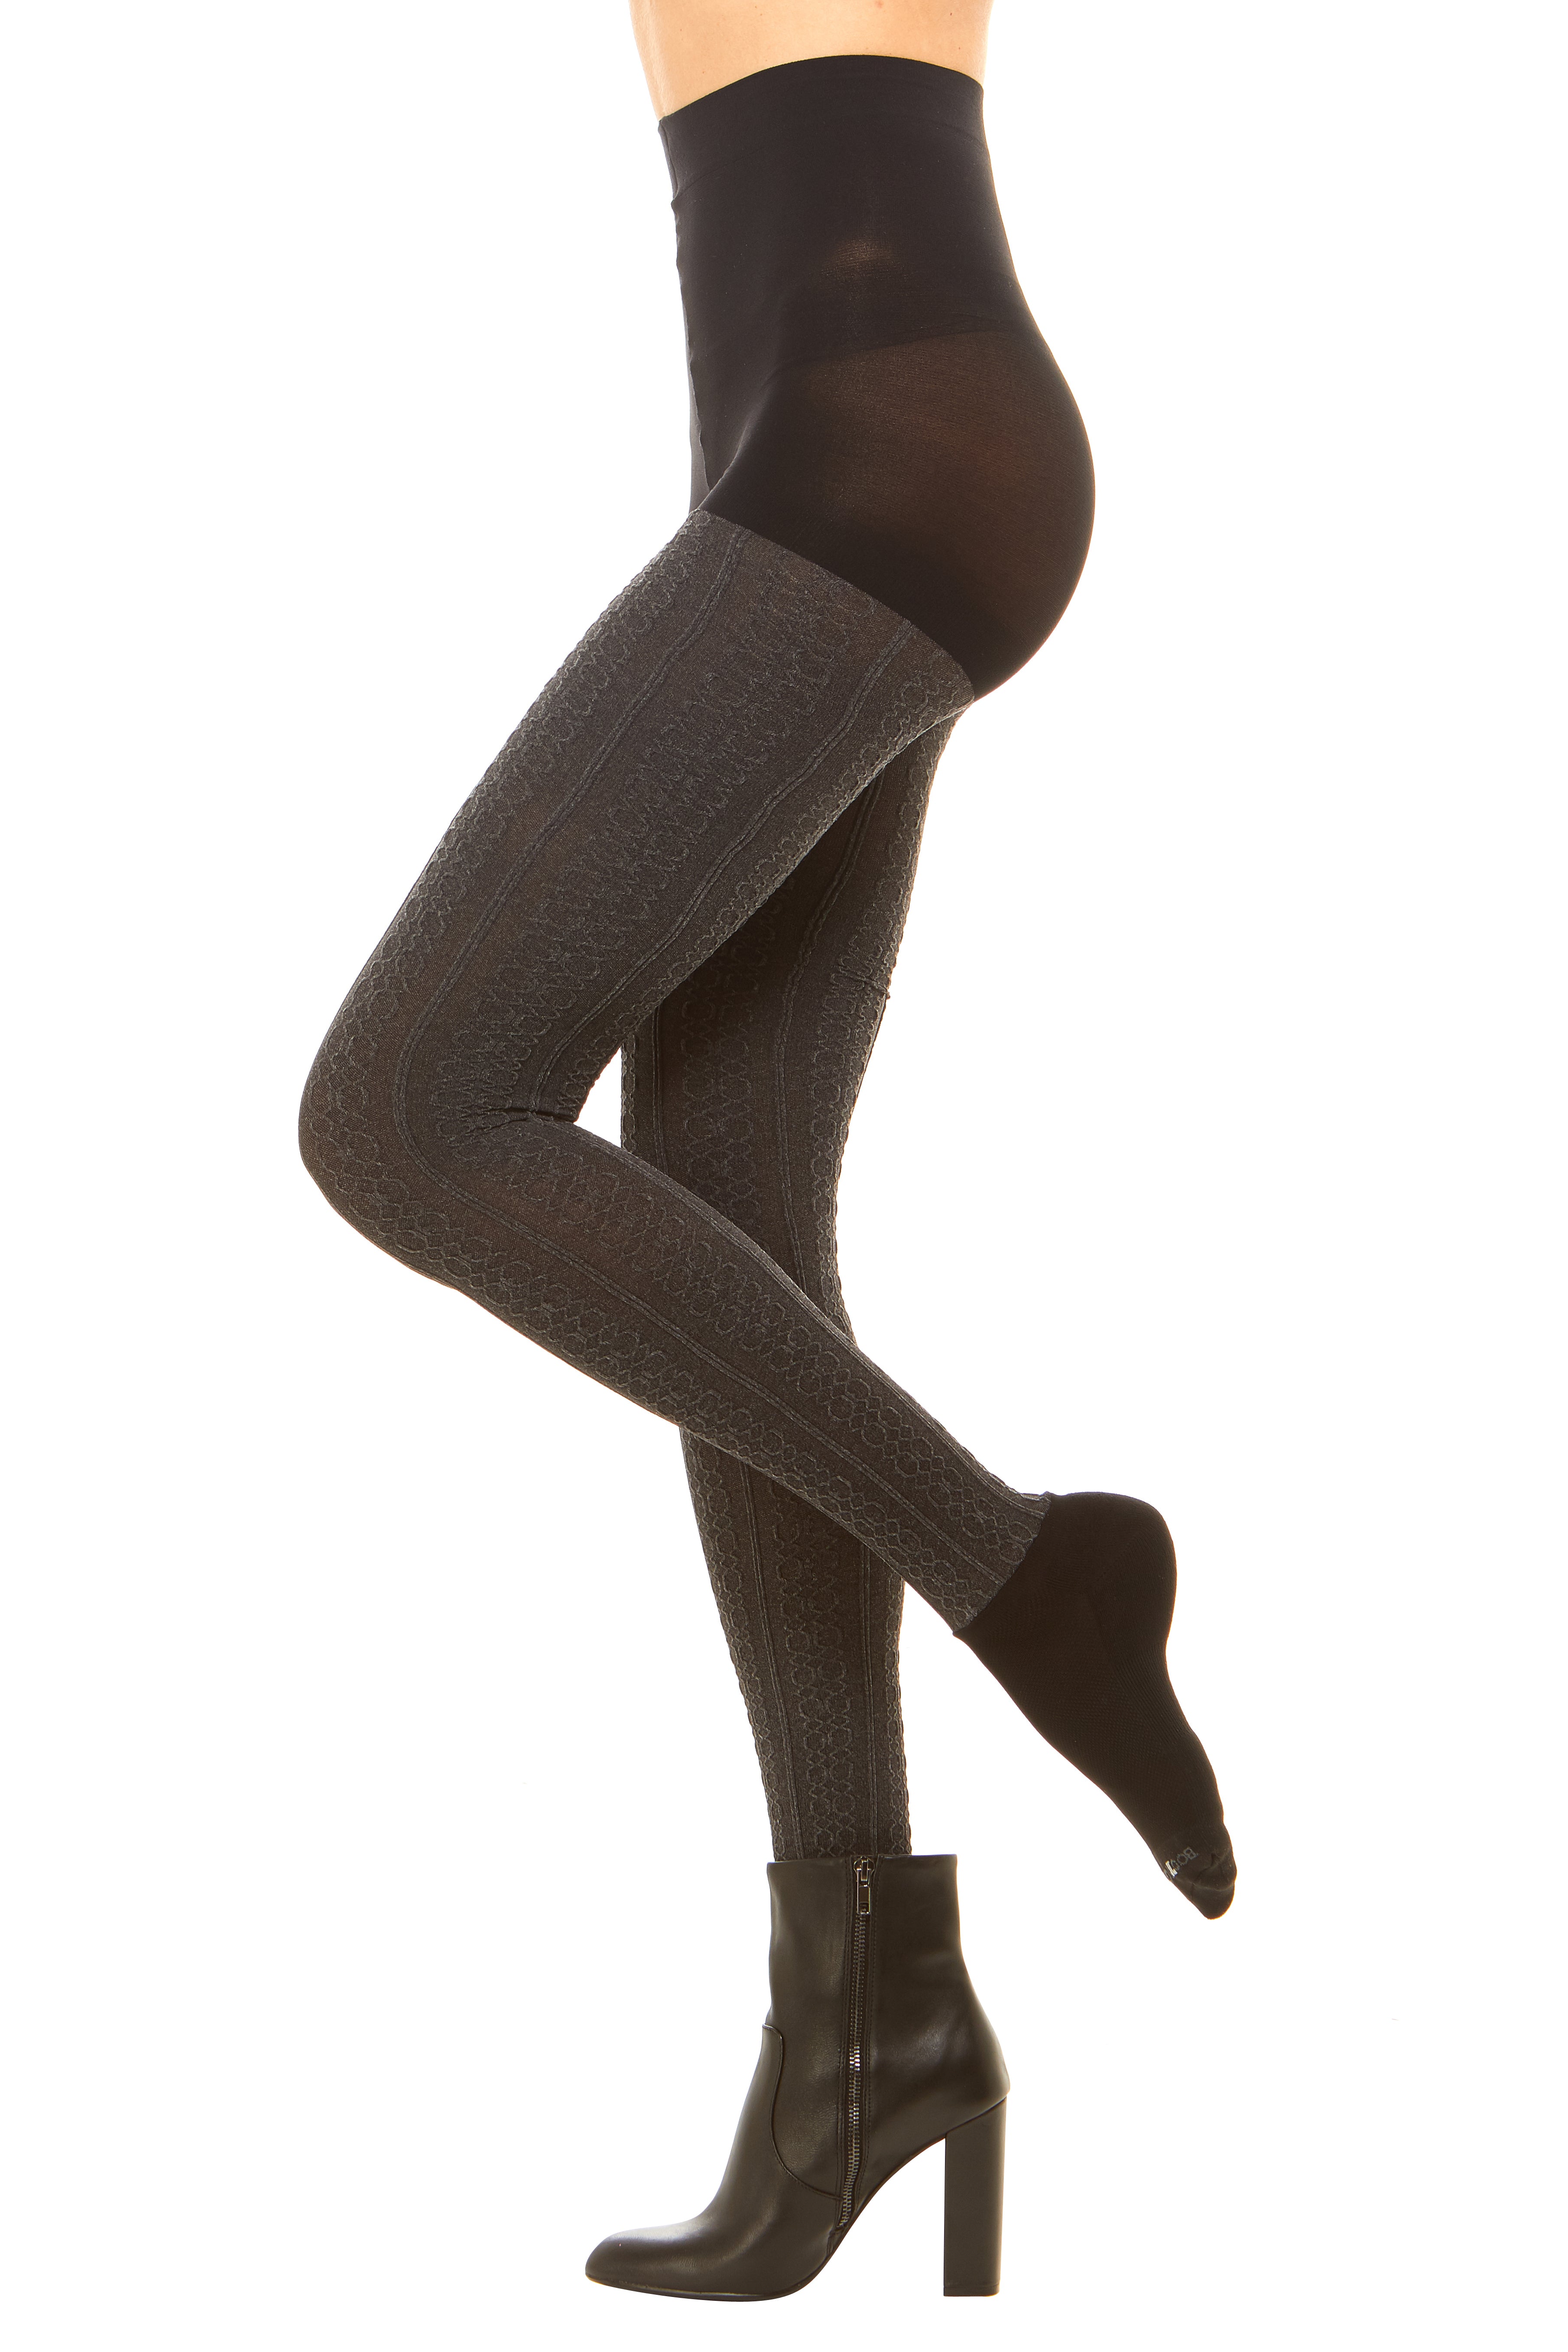 Premium semi opaque women’s tights in a cable knit pattern with attached performance athletic socks and tummy control waistband 